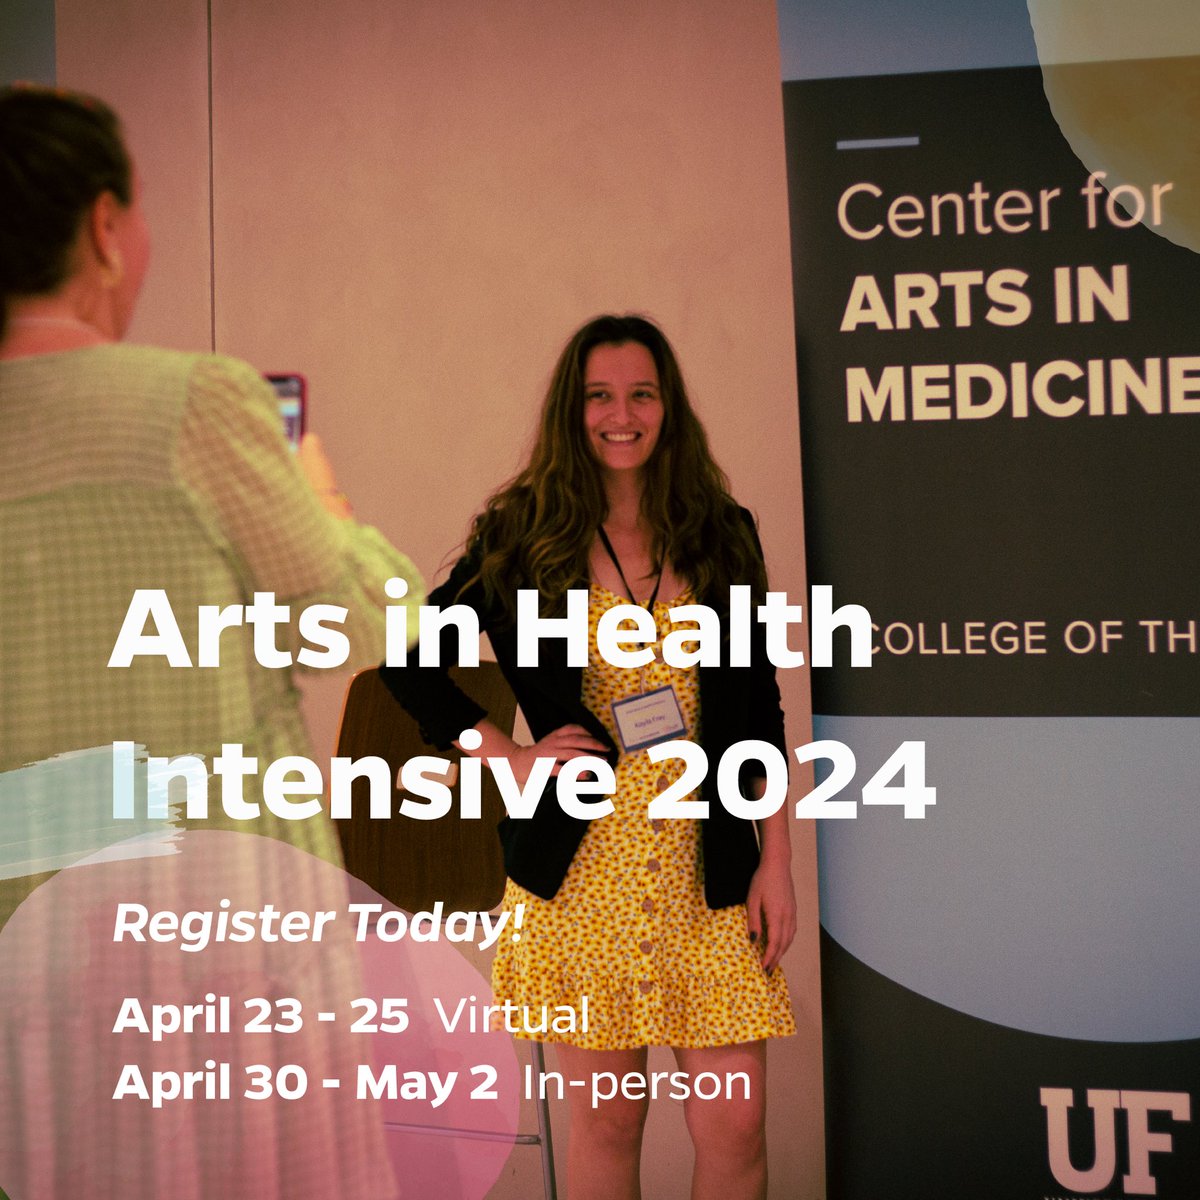 📣 3 DAYS LEFT TO REGISTER! 📣 

Register for Arts in Health Intensive 2024 by April 15th! Week 2 is already SOLD OUT, but you can still join us for week 1 (virtual) on April 23-25. Check out the agenda online now!
 
bit.ly/AIHI2024
#ArtsInHealth #AIHI2024